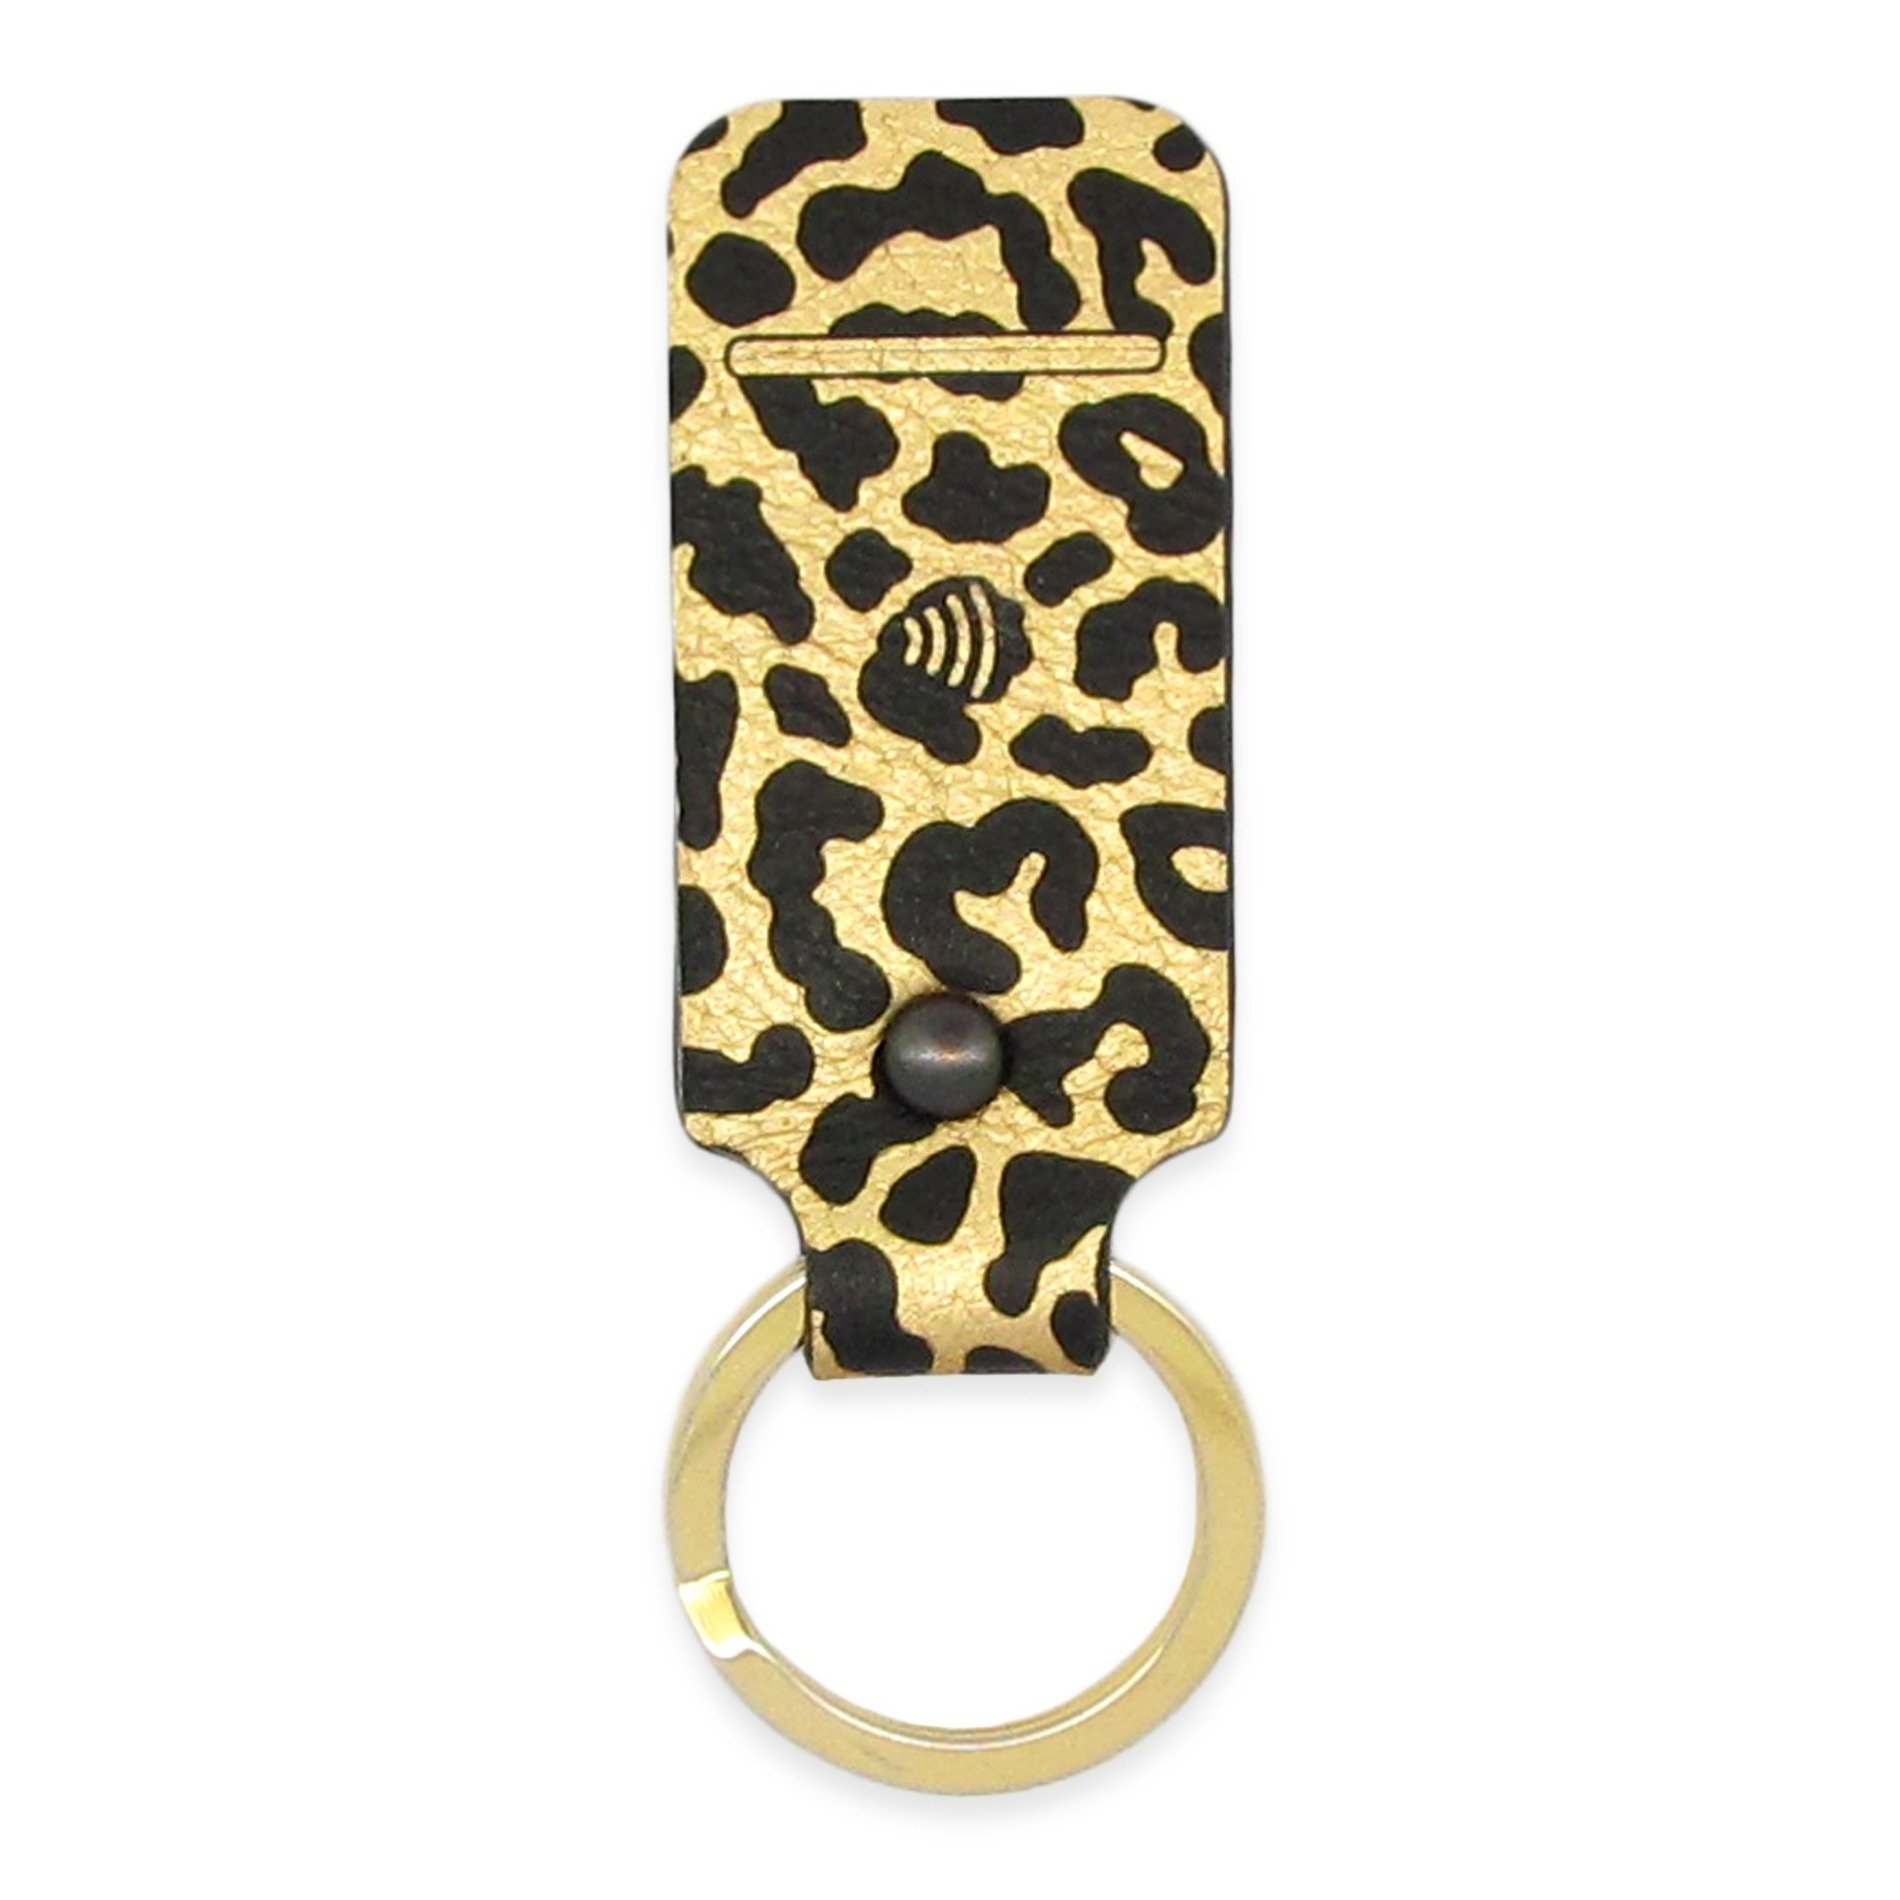 Leather Contactless Payment Key Fob – Leopard – With Contactless Payment Chip / Gold